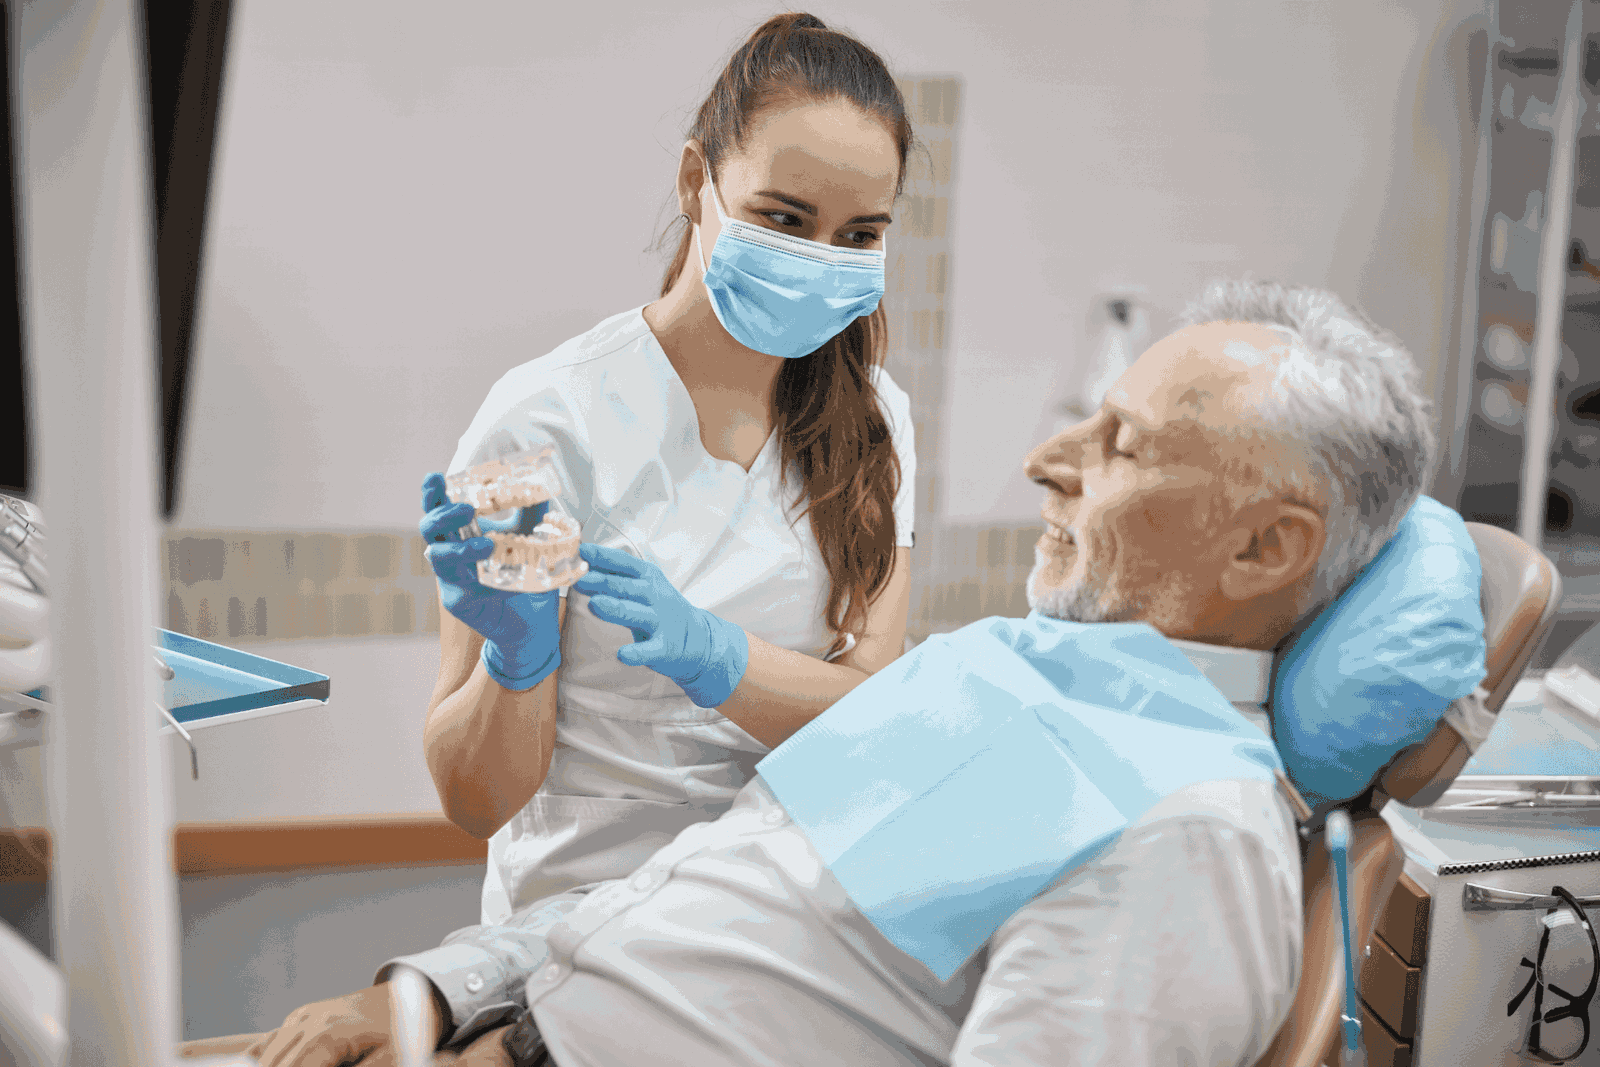 Dental implants services in Manchester, CT